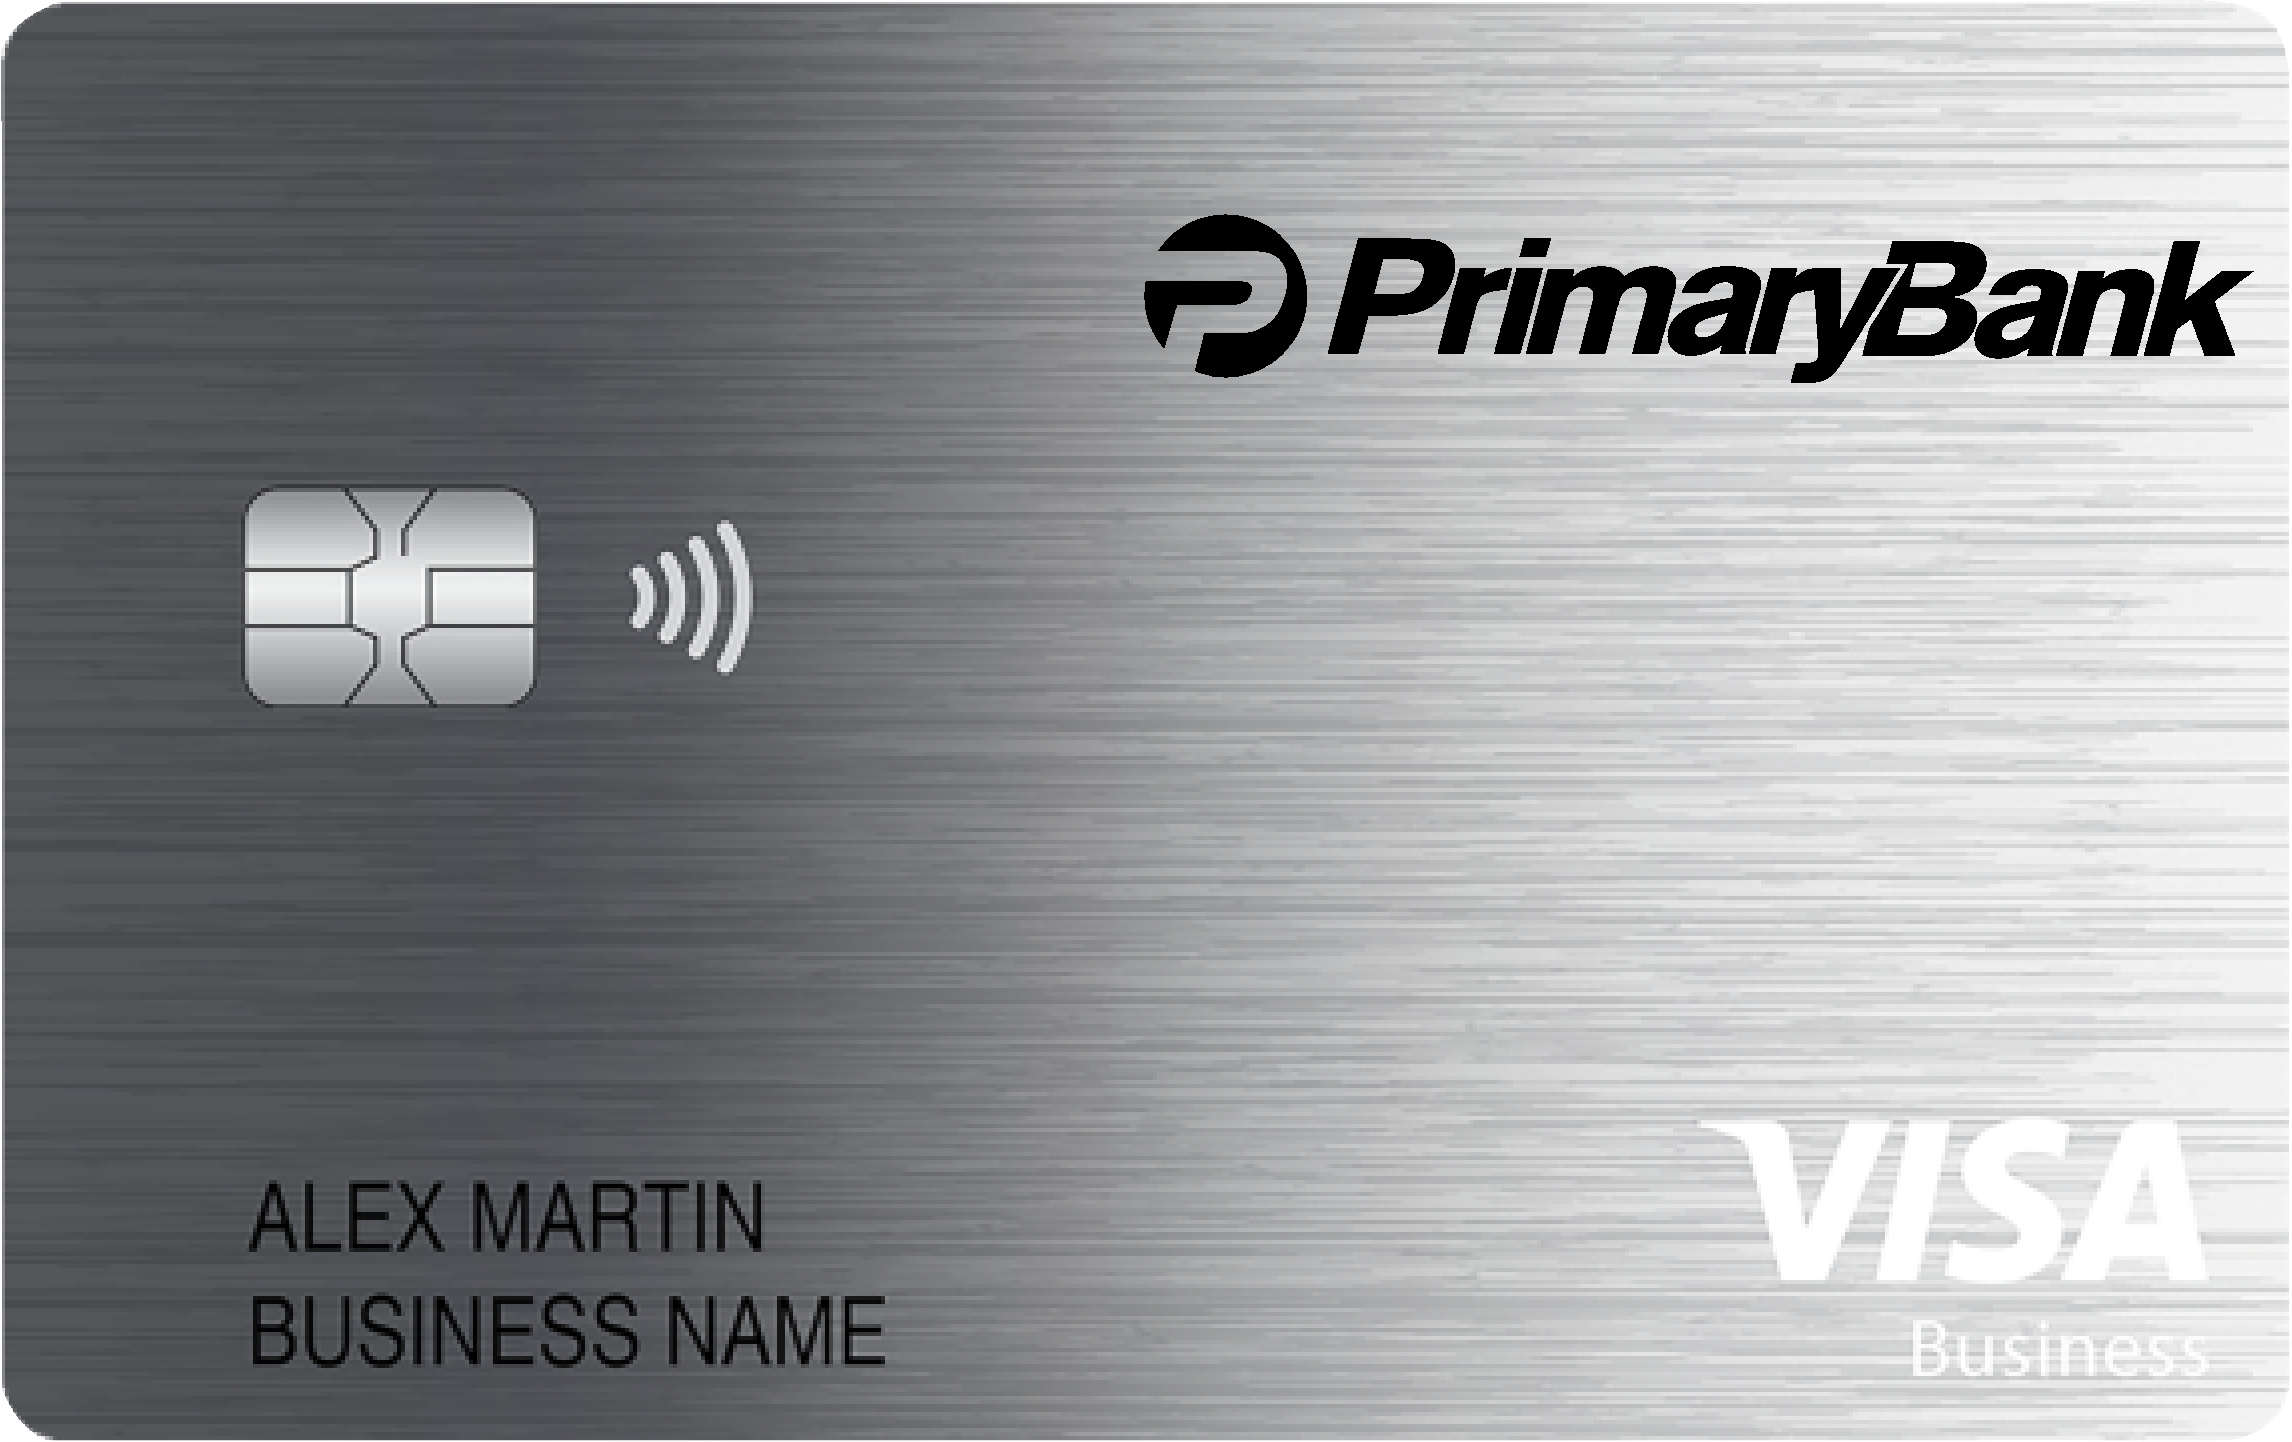 Primary Bank Business Card Card